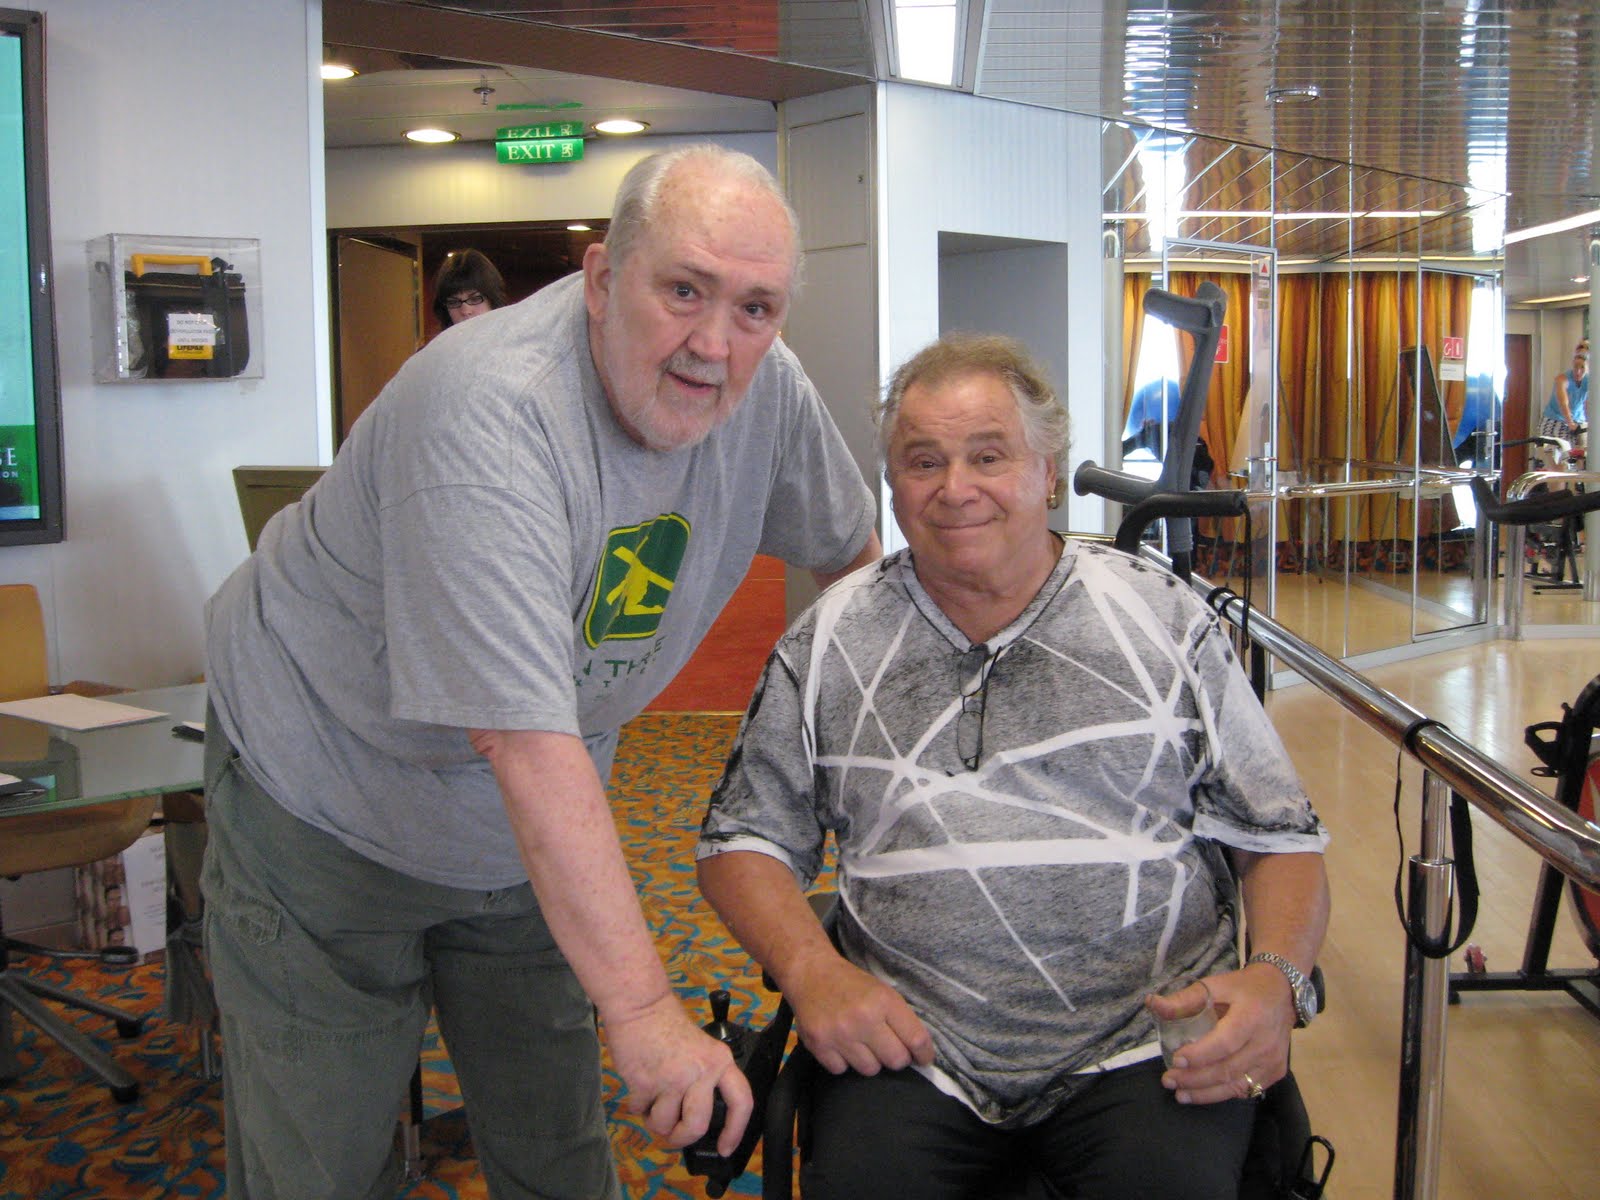 Art Metrano smiling while sitting on a wheelchair in a gray shirt and black pants